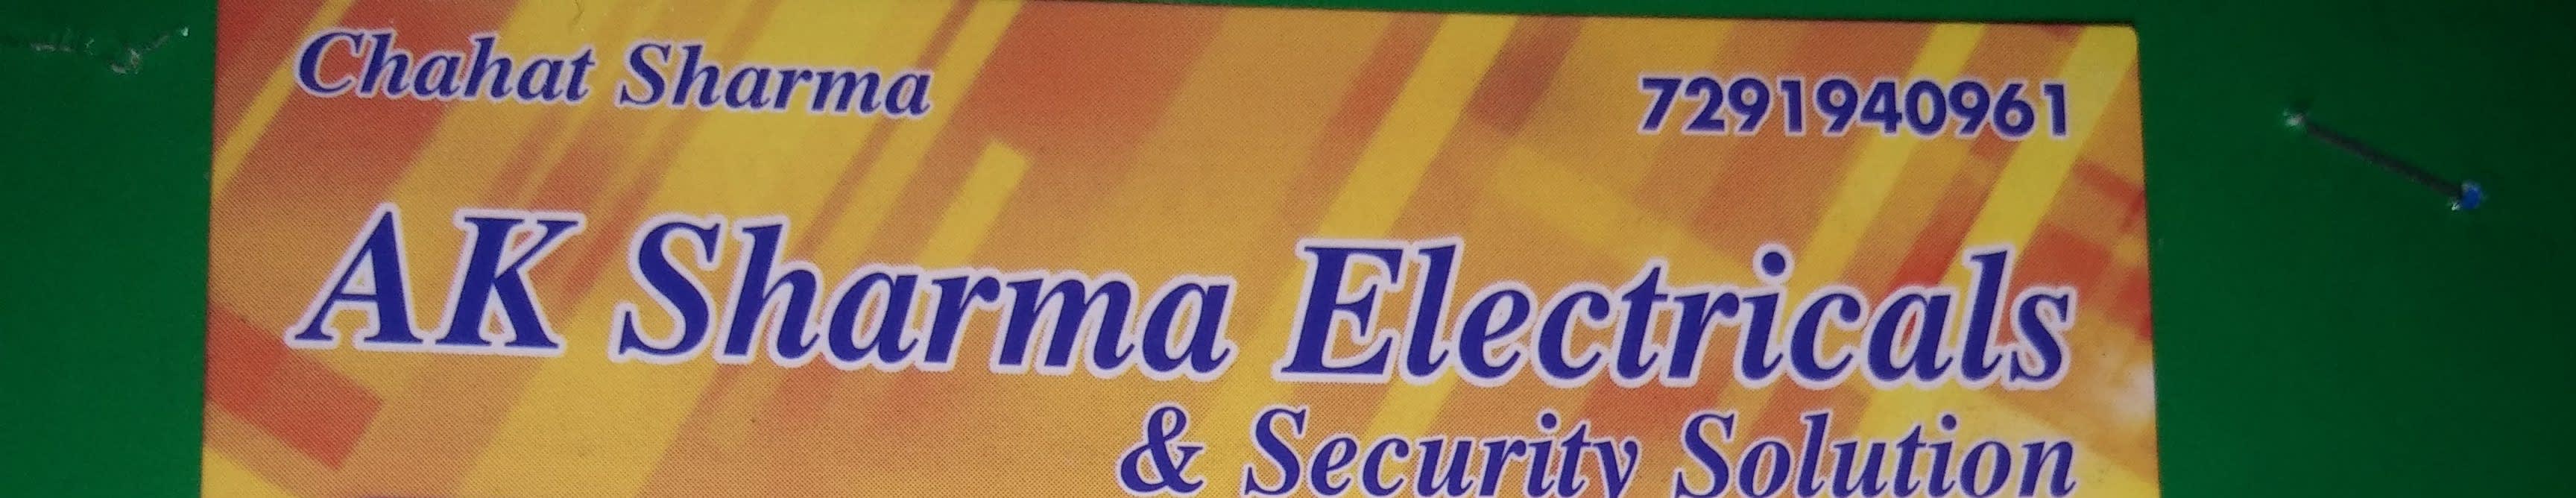 AK Sharma Electricals & Security Solution